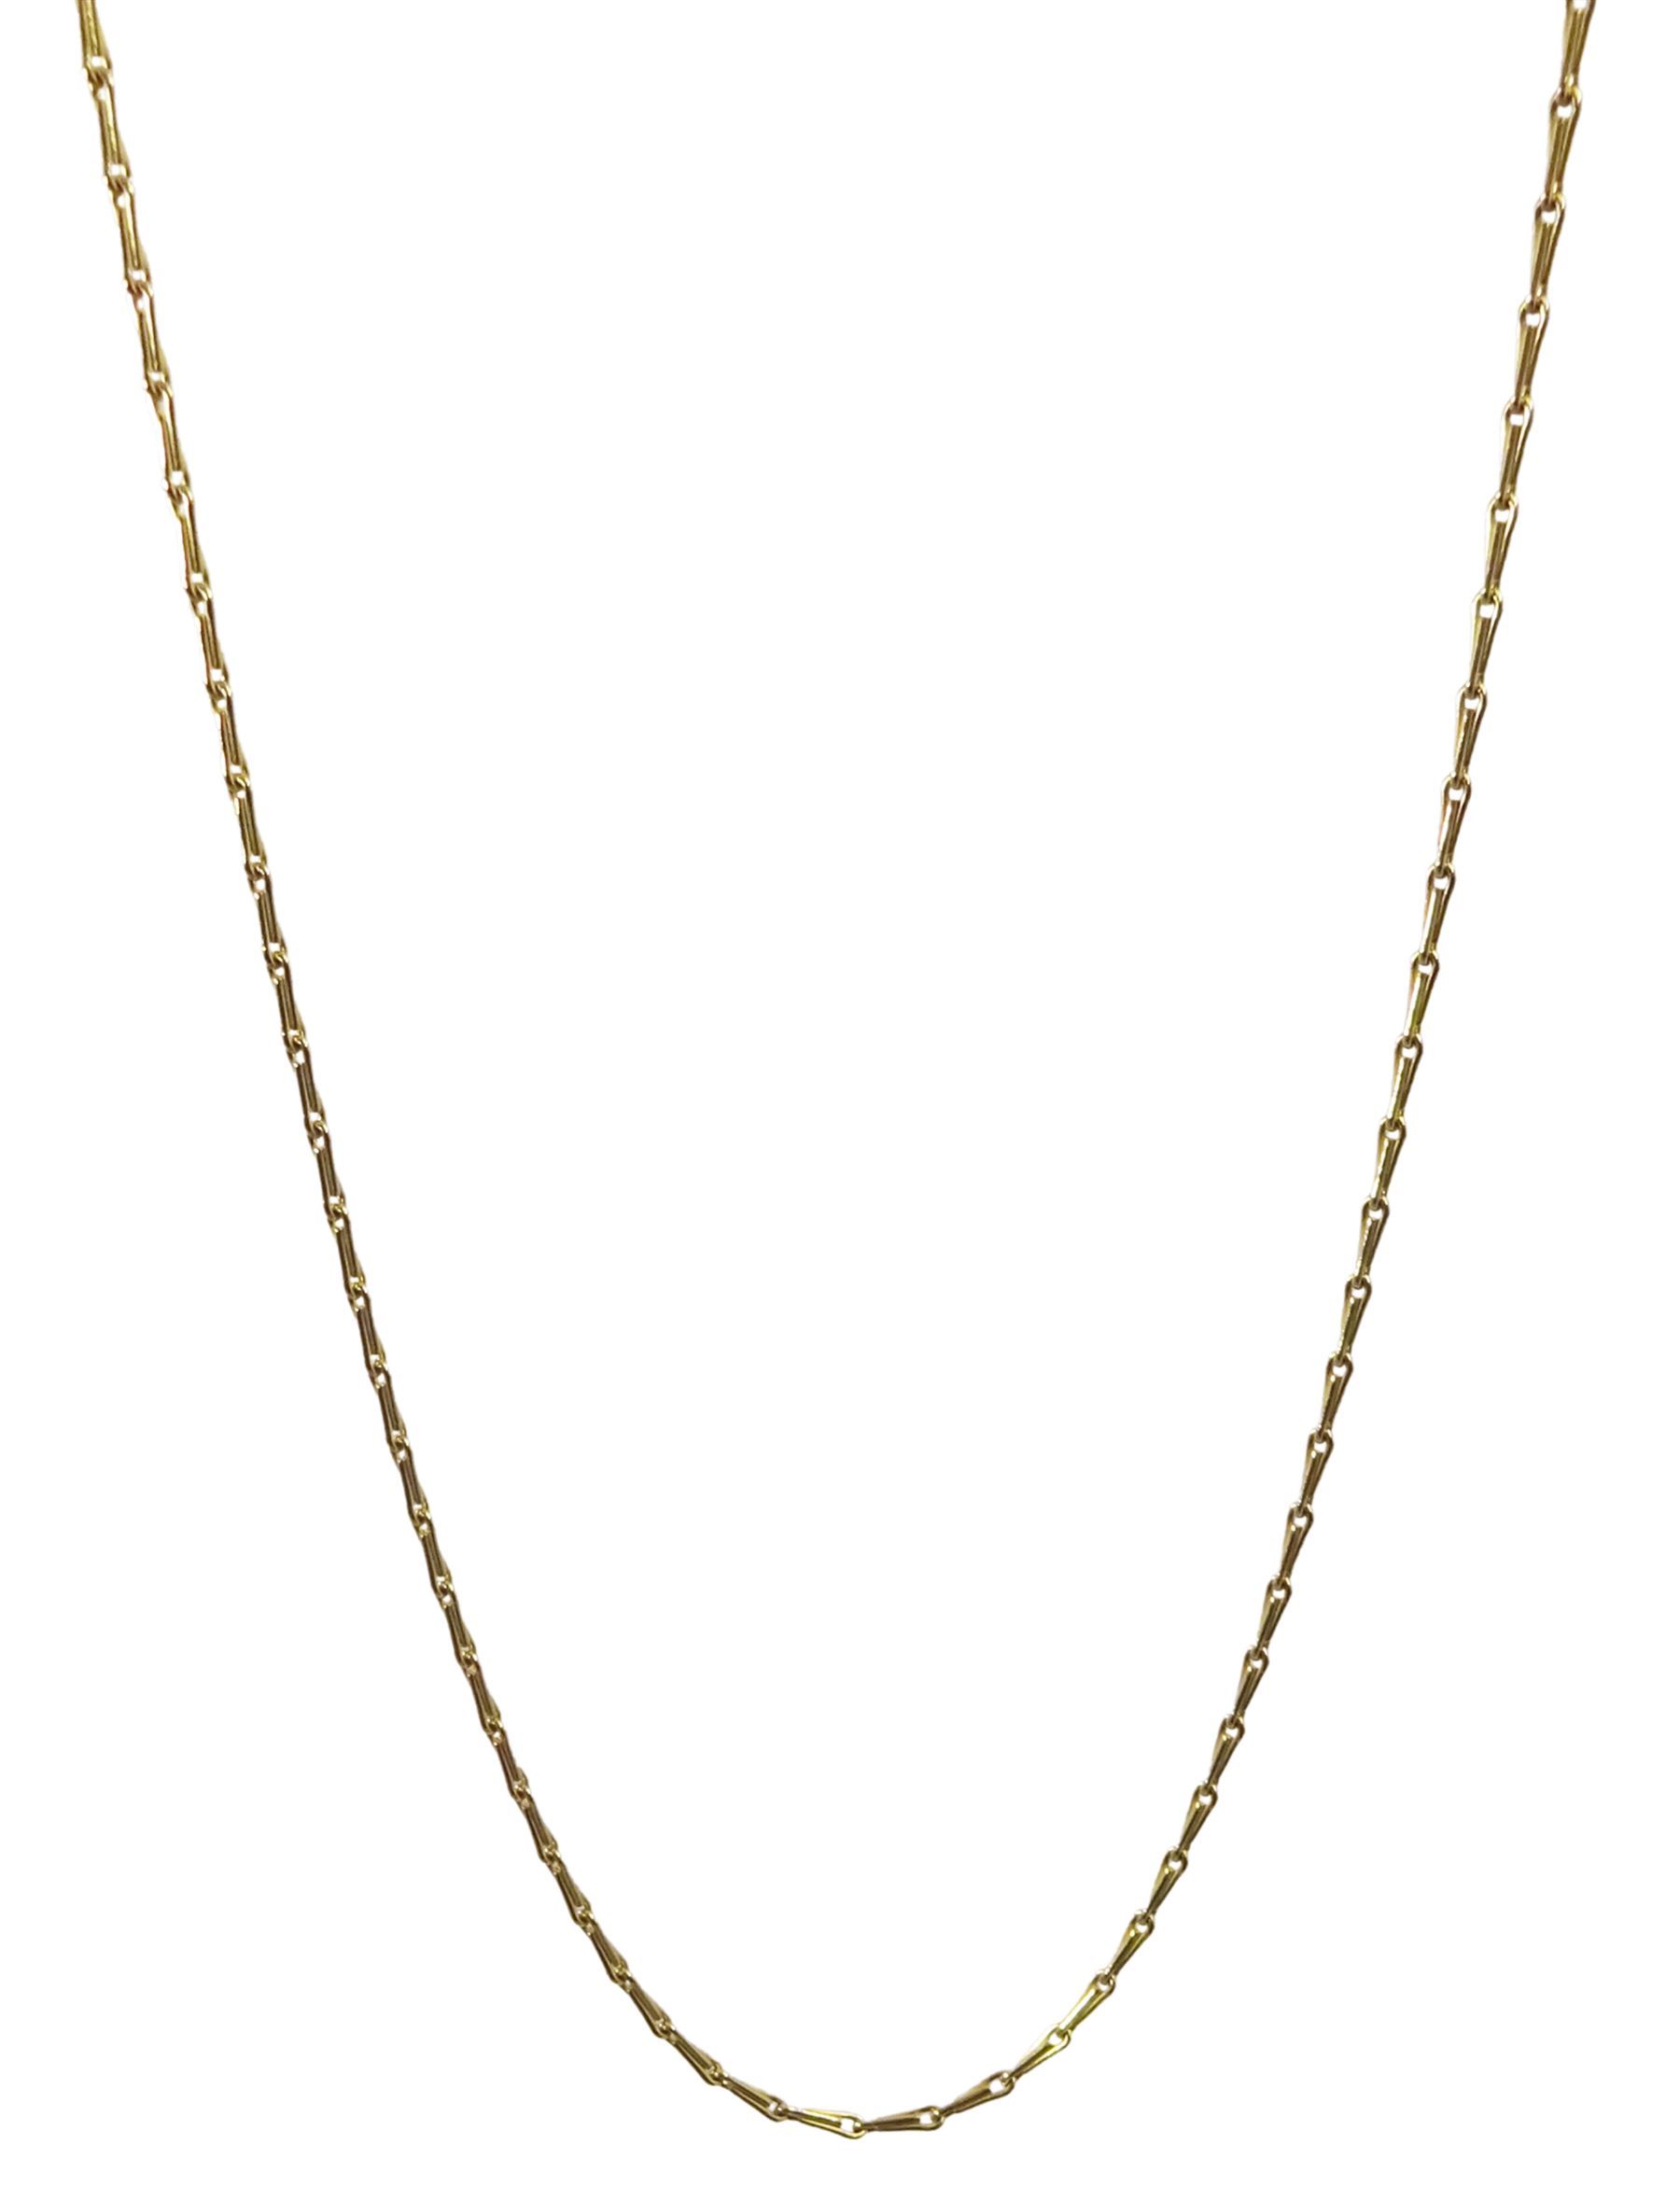 9ct gold fancy link necklace